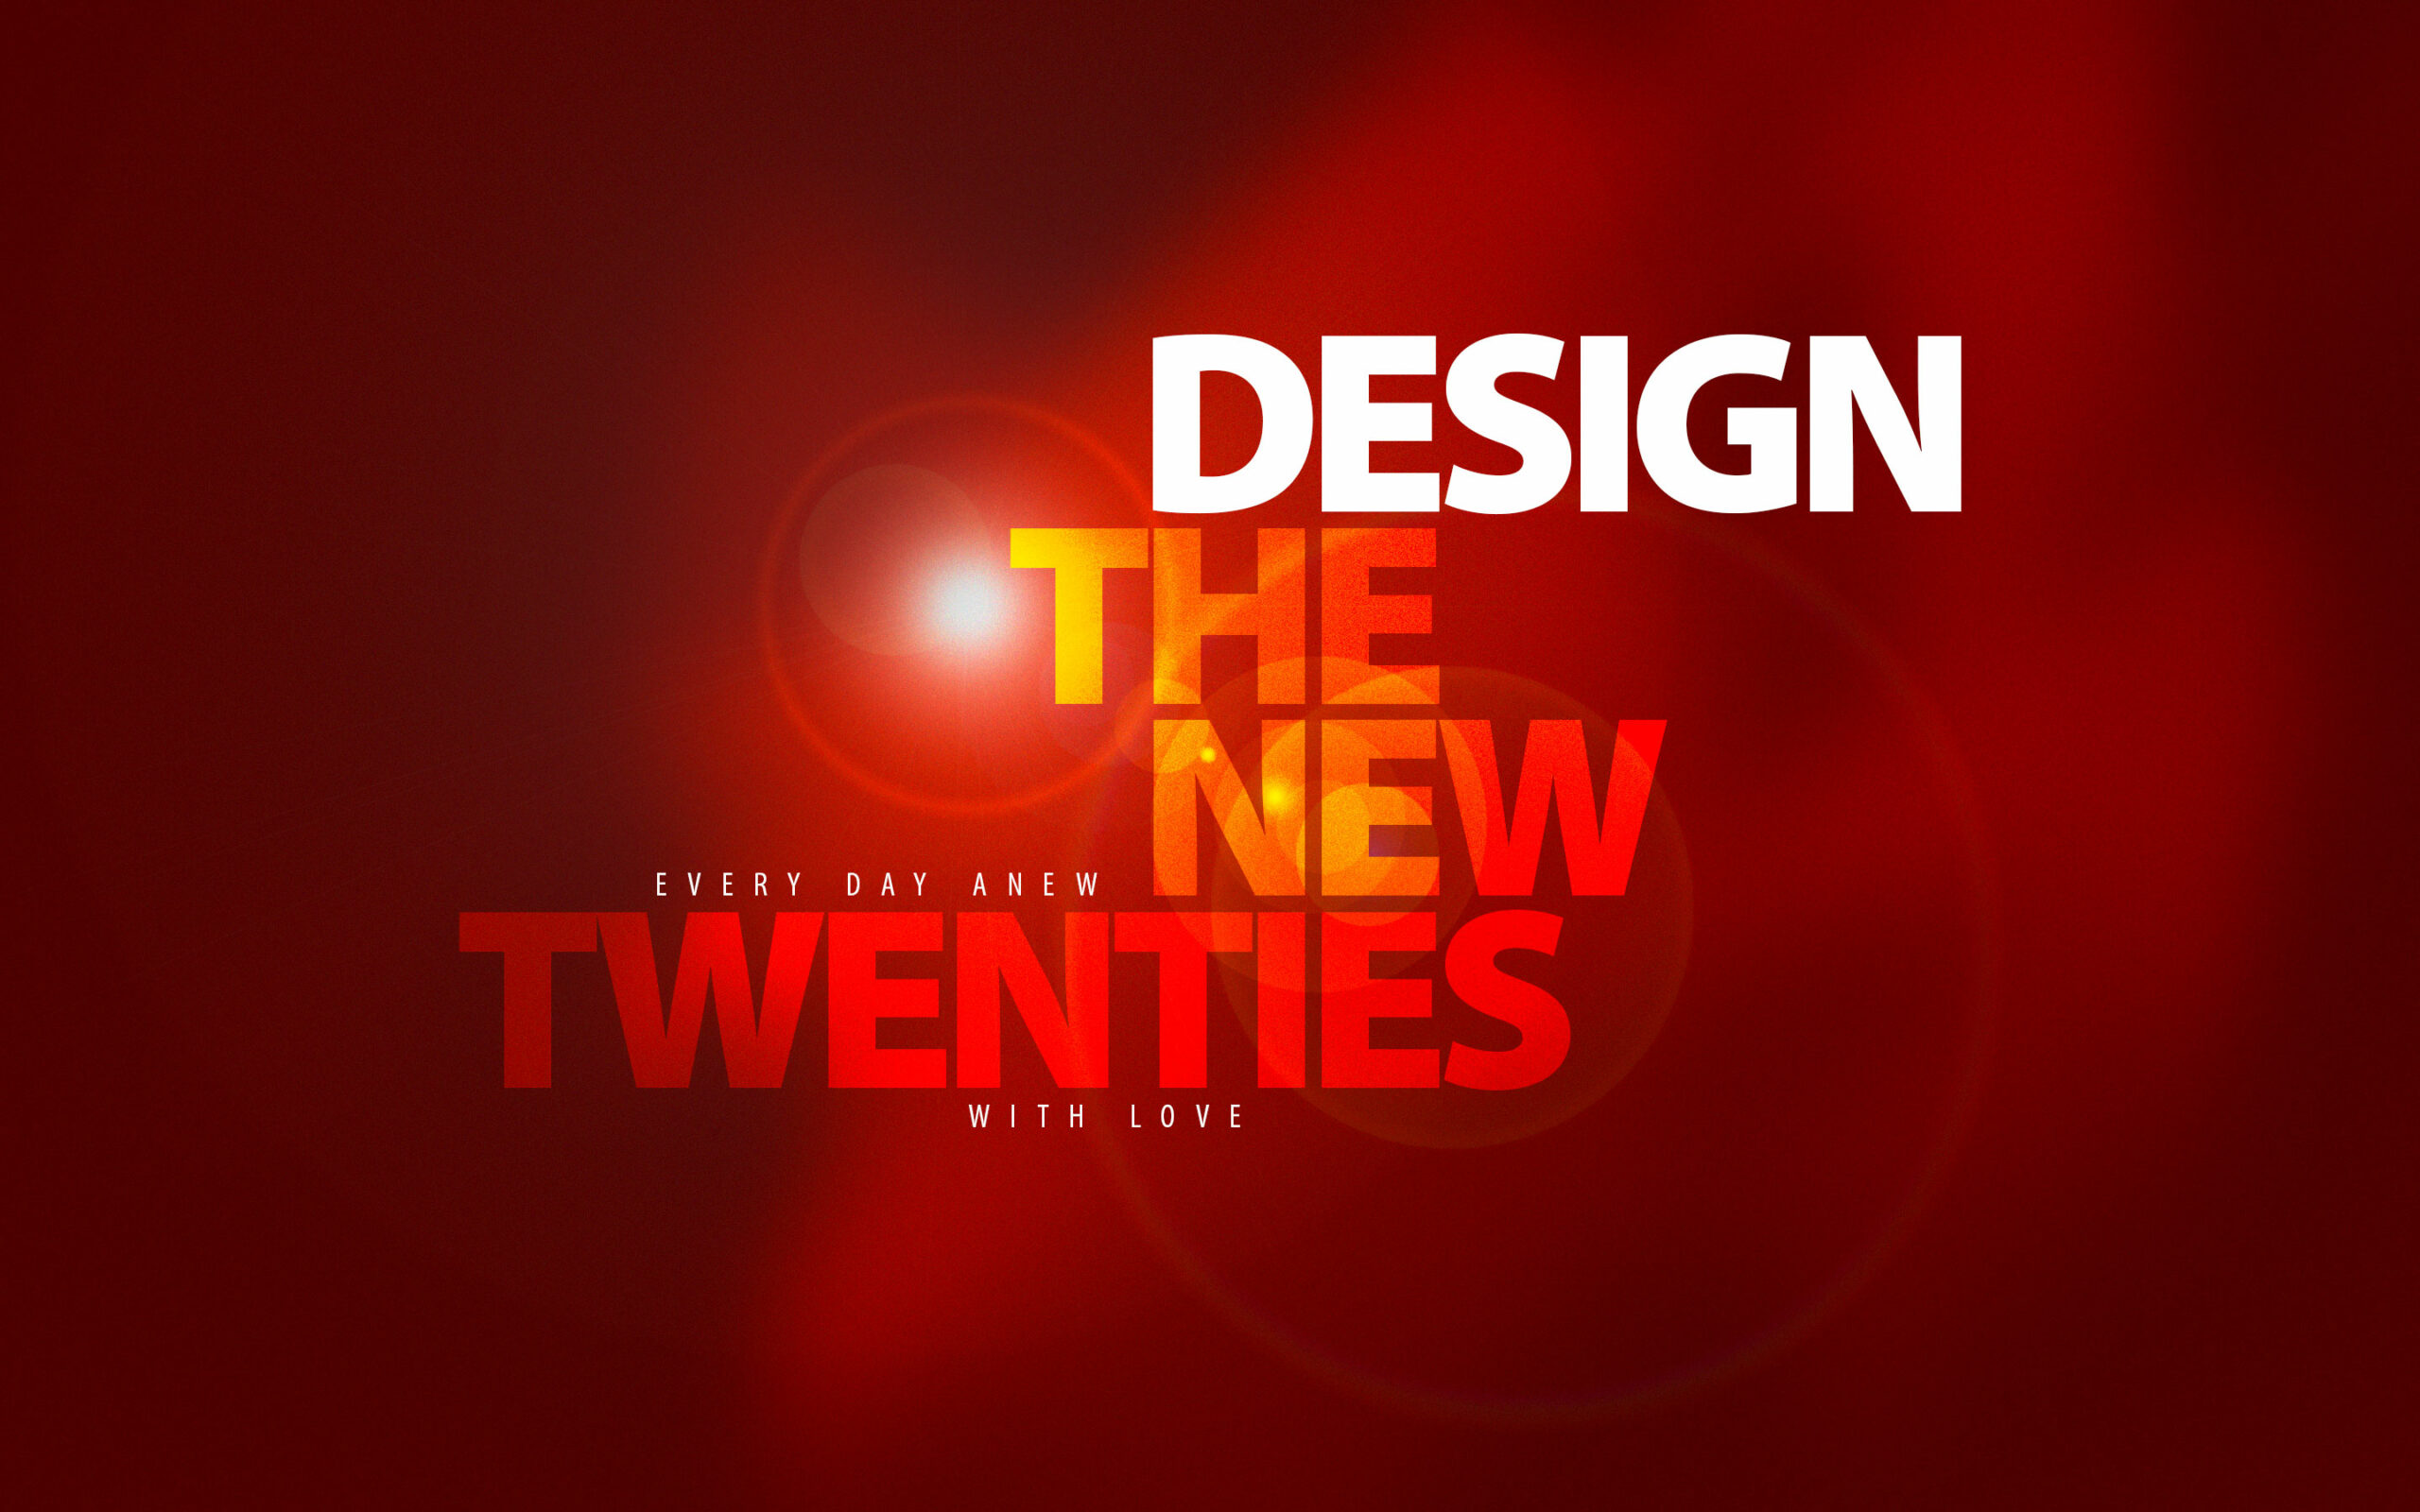 Design the New Twenties – Every day anew with Love (red)